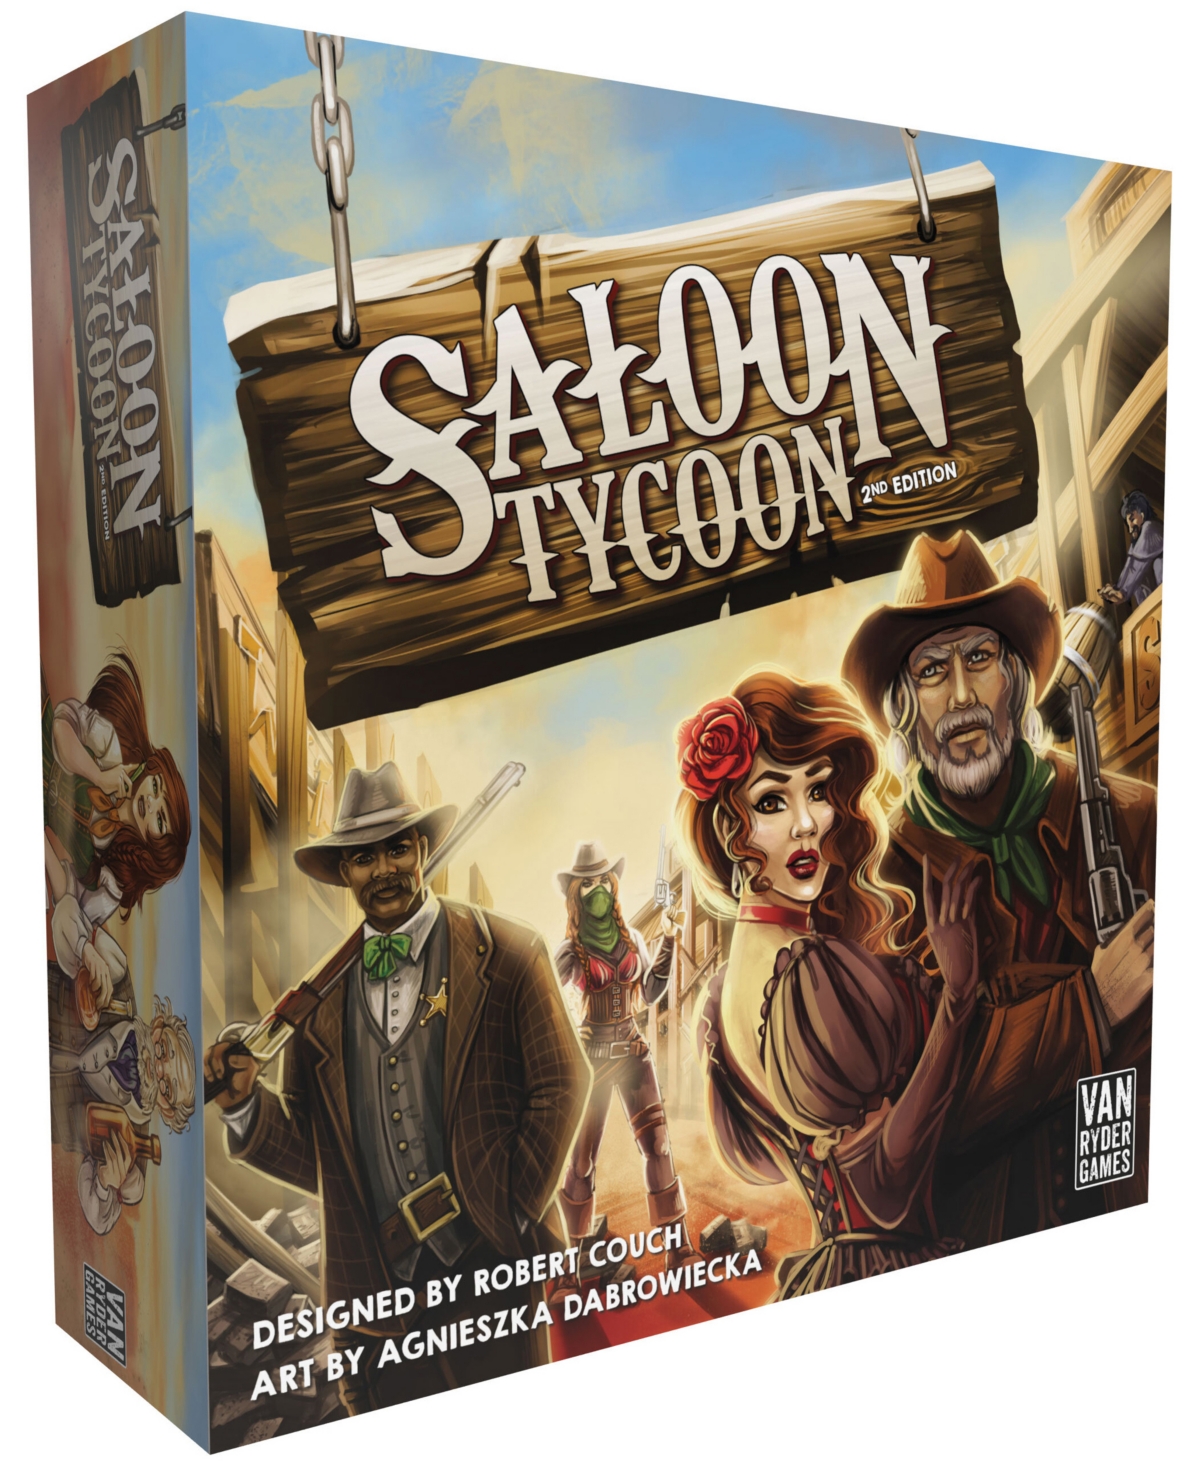 University Games Kids' Van Ryder Games Saloon Tycoon Strategy Game 2nd Edition In No Color